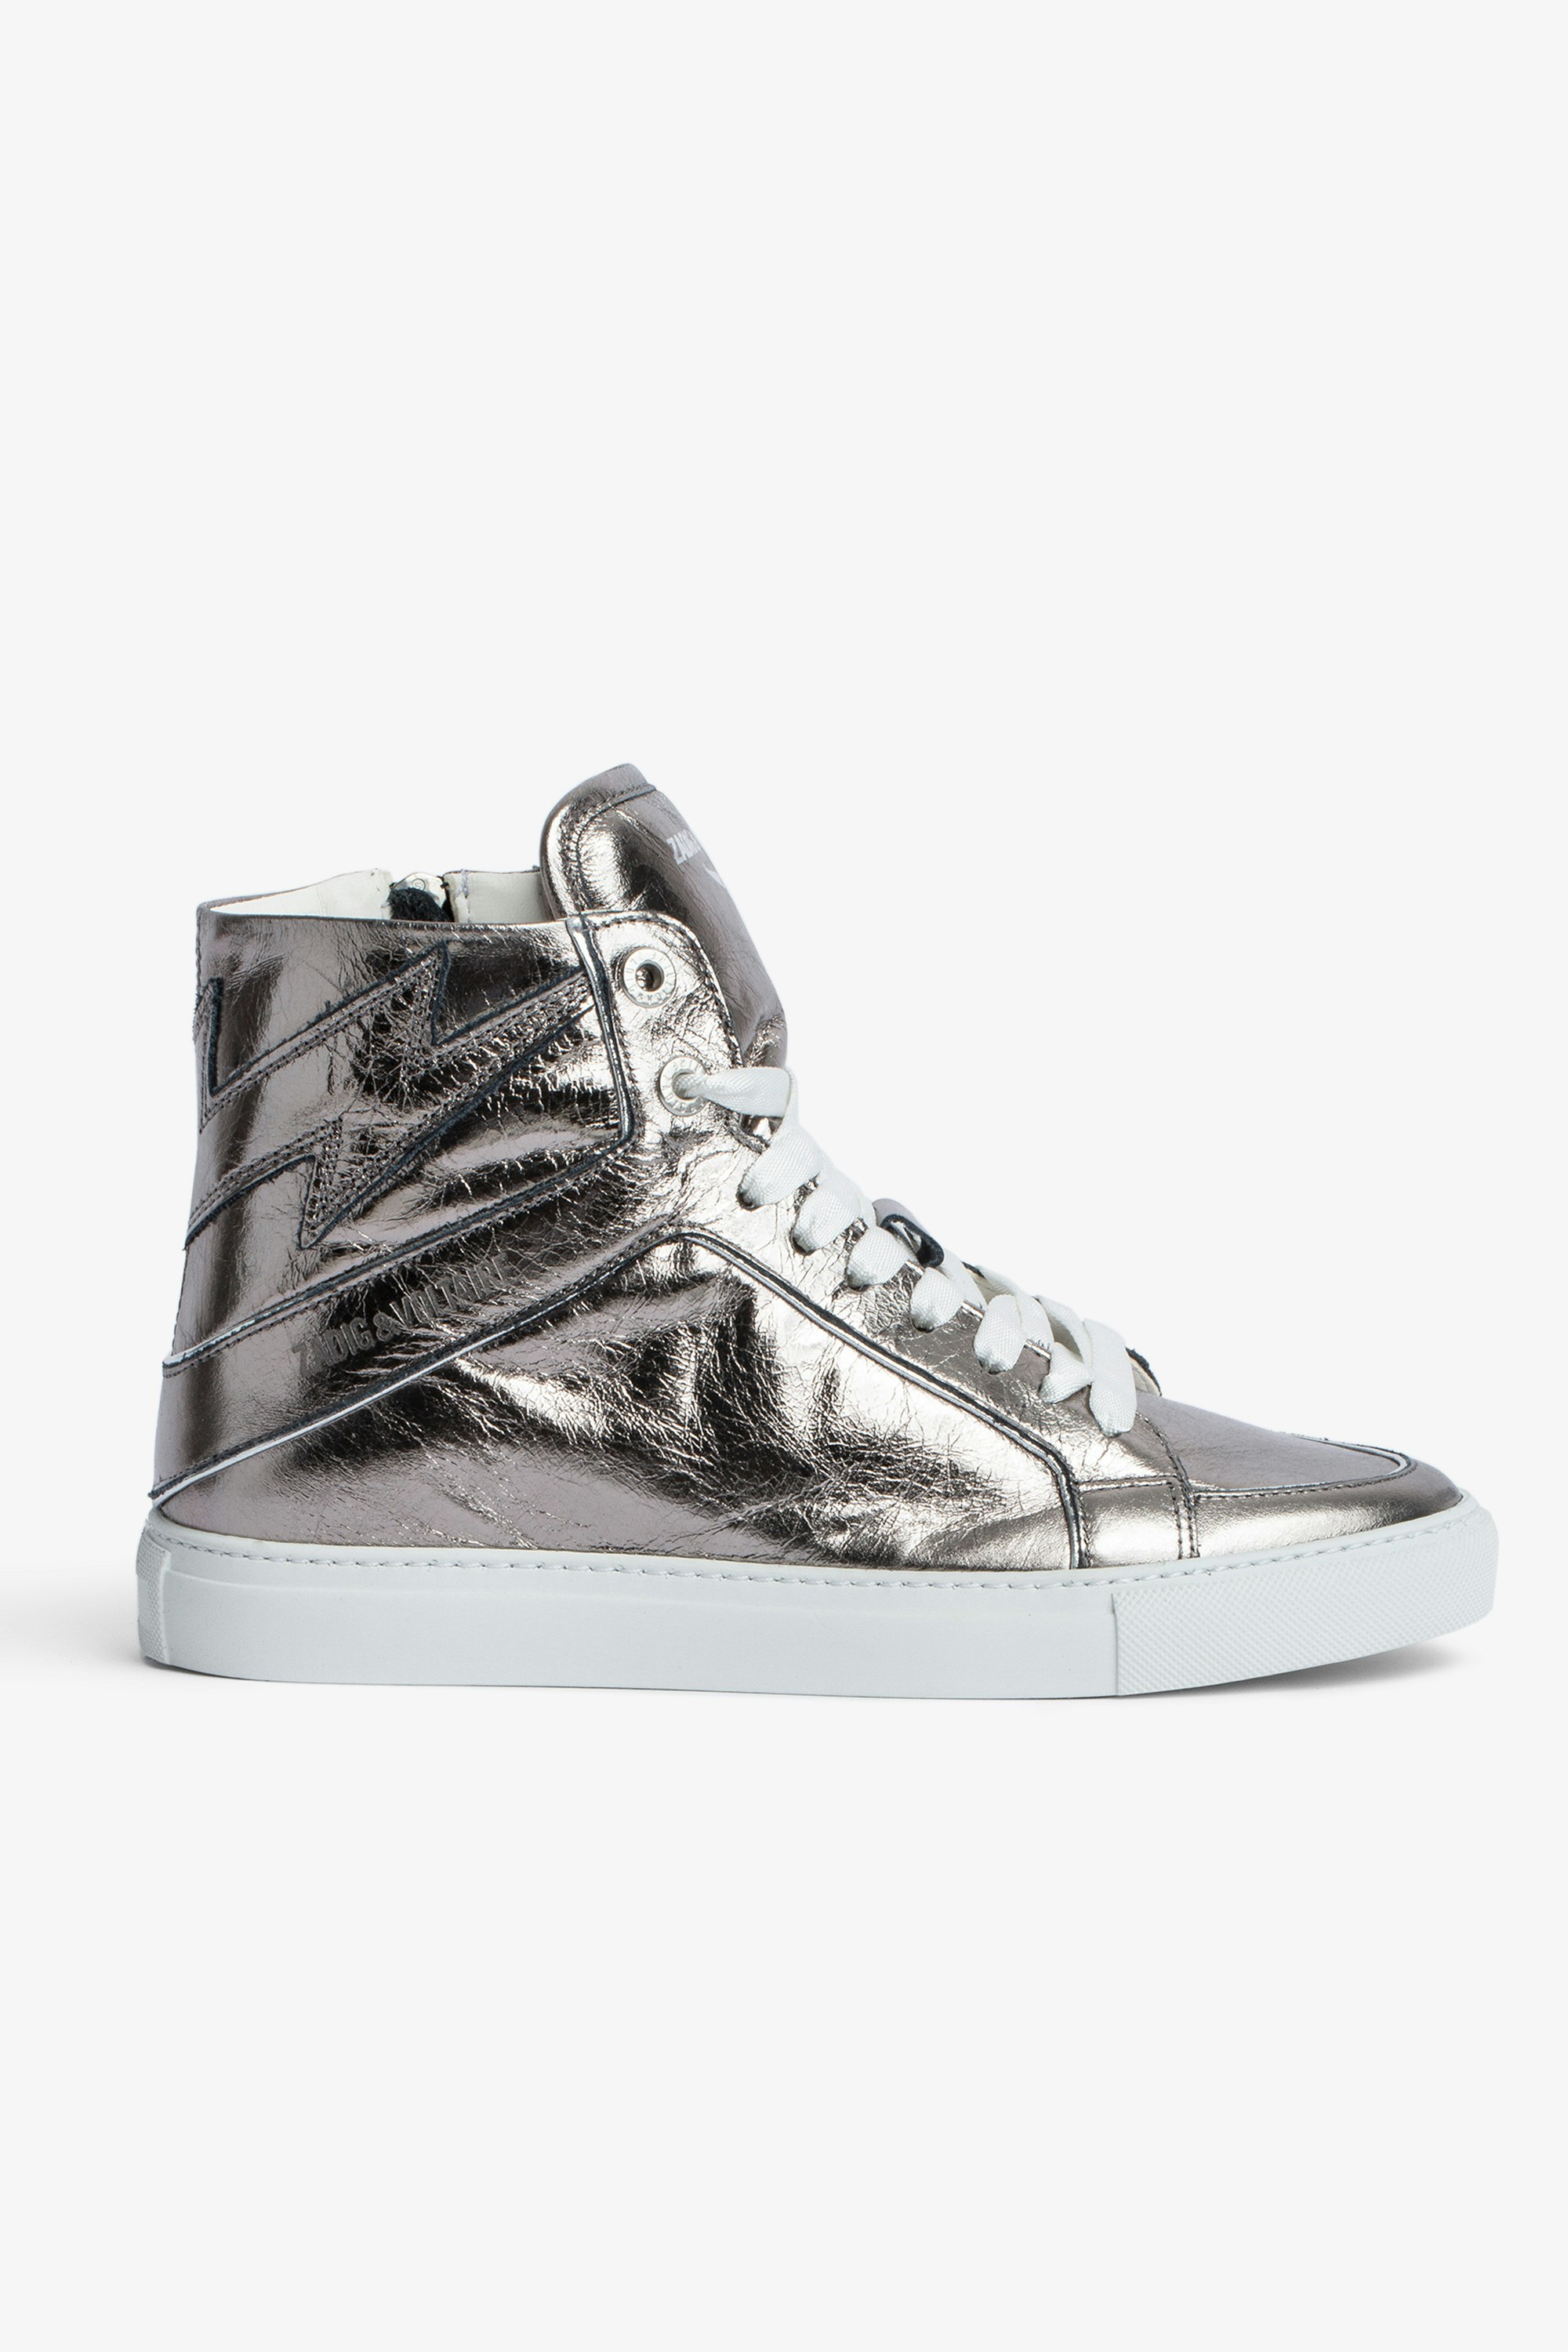 Zadig & Voltaire Zv1747 Mid-flash Graffiti-art Leather Trainers in White Womens Shoes Trainers High-top trainers 